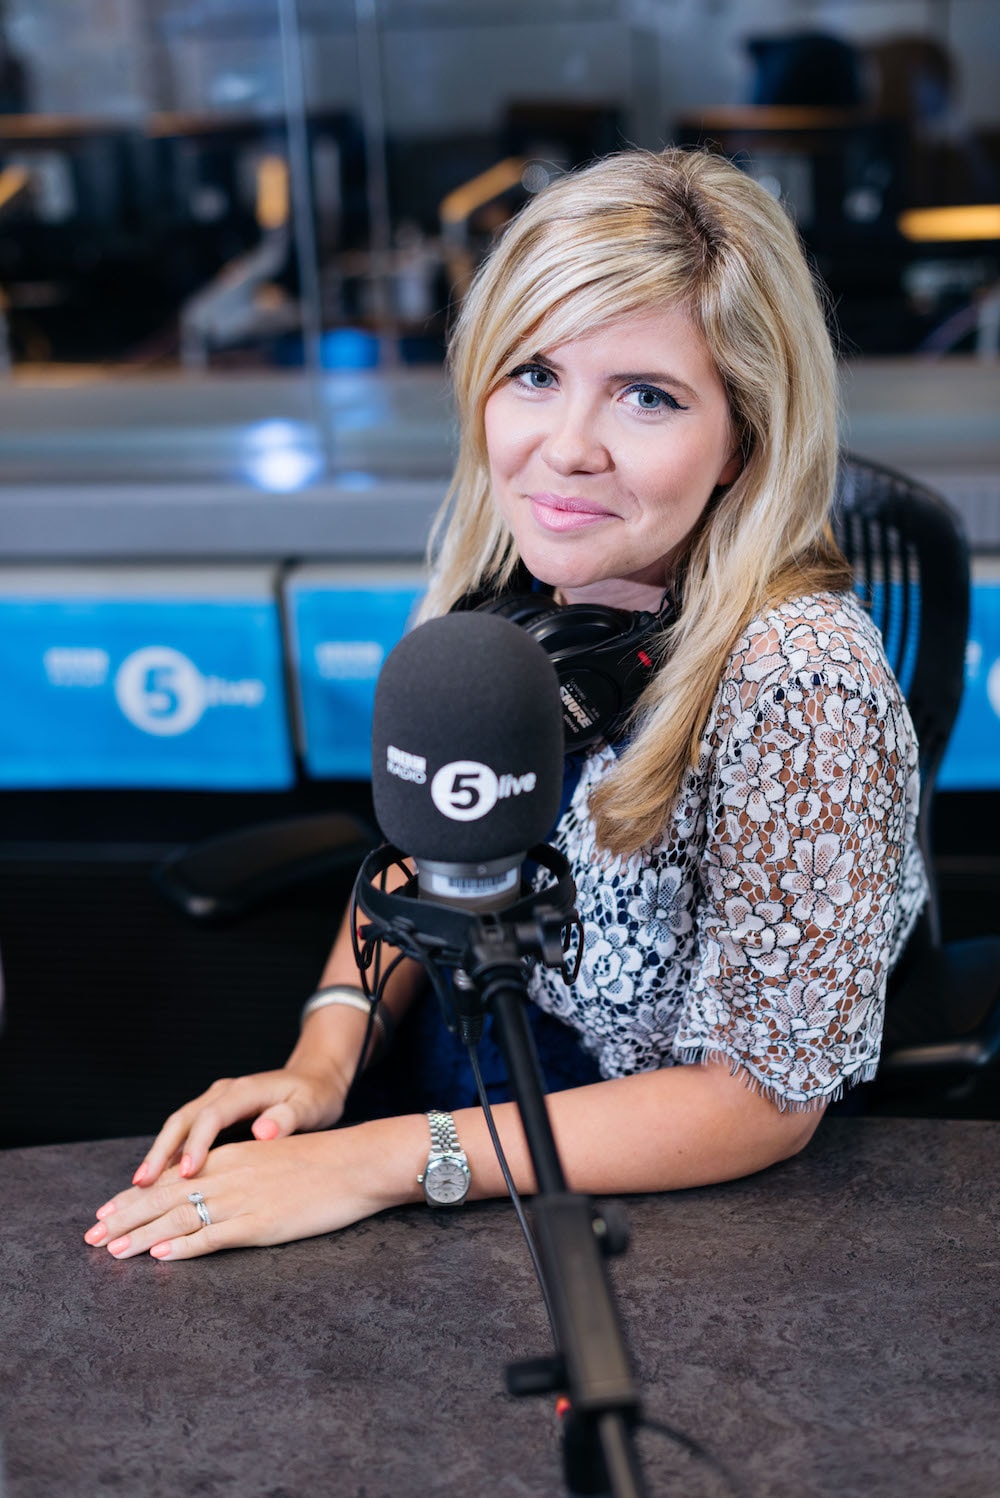 This is a photo of Emma Barnett